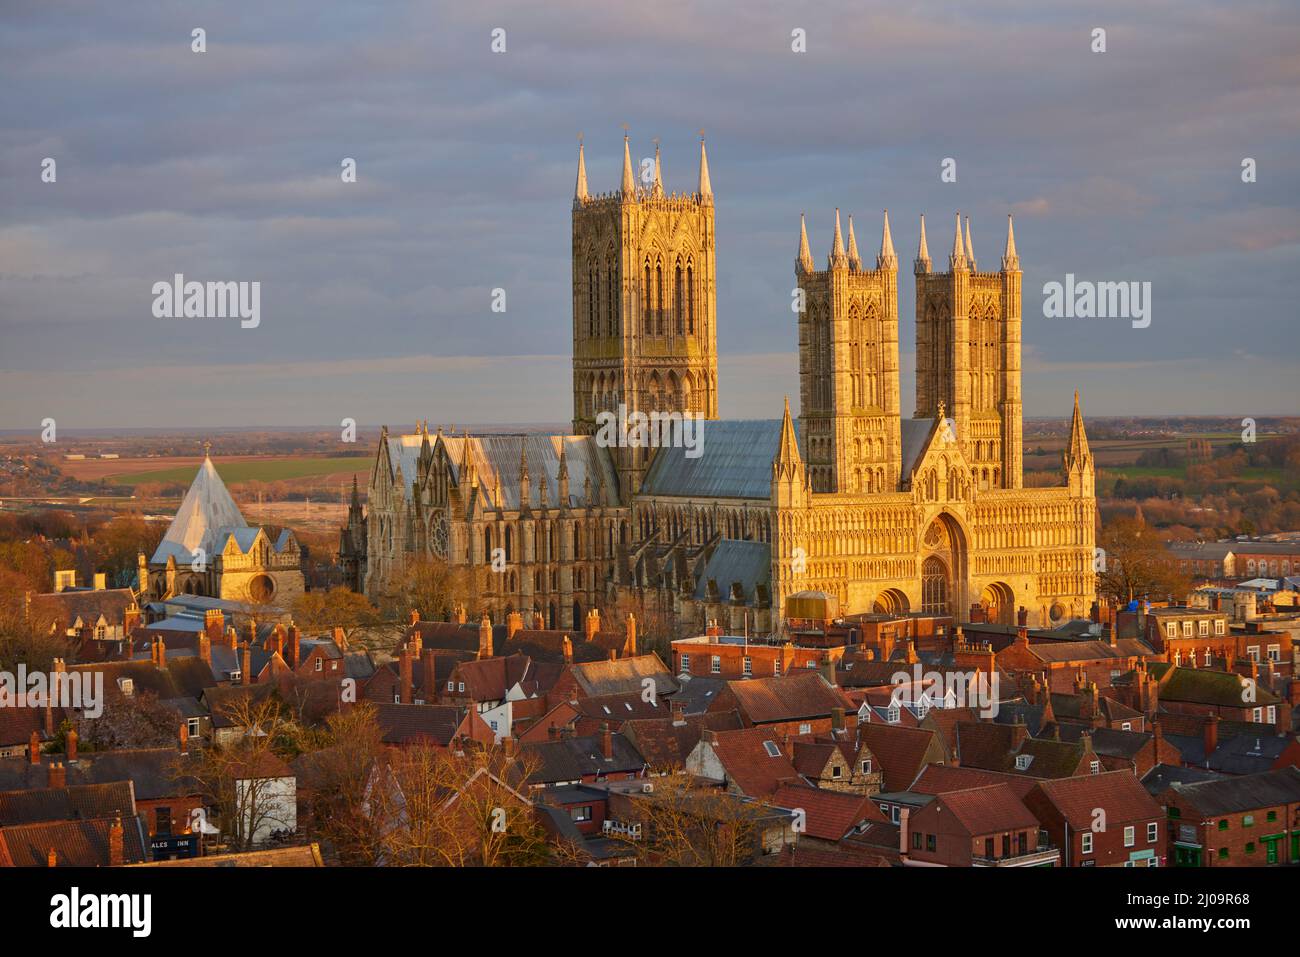 Lincoln Cathedral 2022, Lincoln Minster, or the Cathedral Church of the Blessed Virgin Mary of Lincoln 2022 - NO SCAFFOLDING Stock Photo